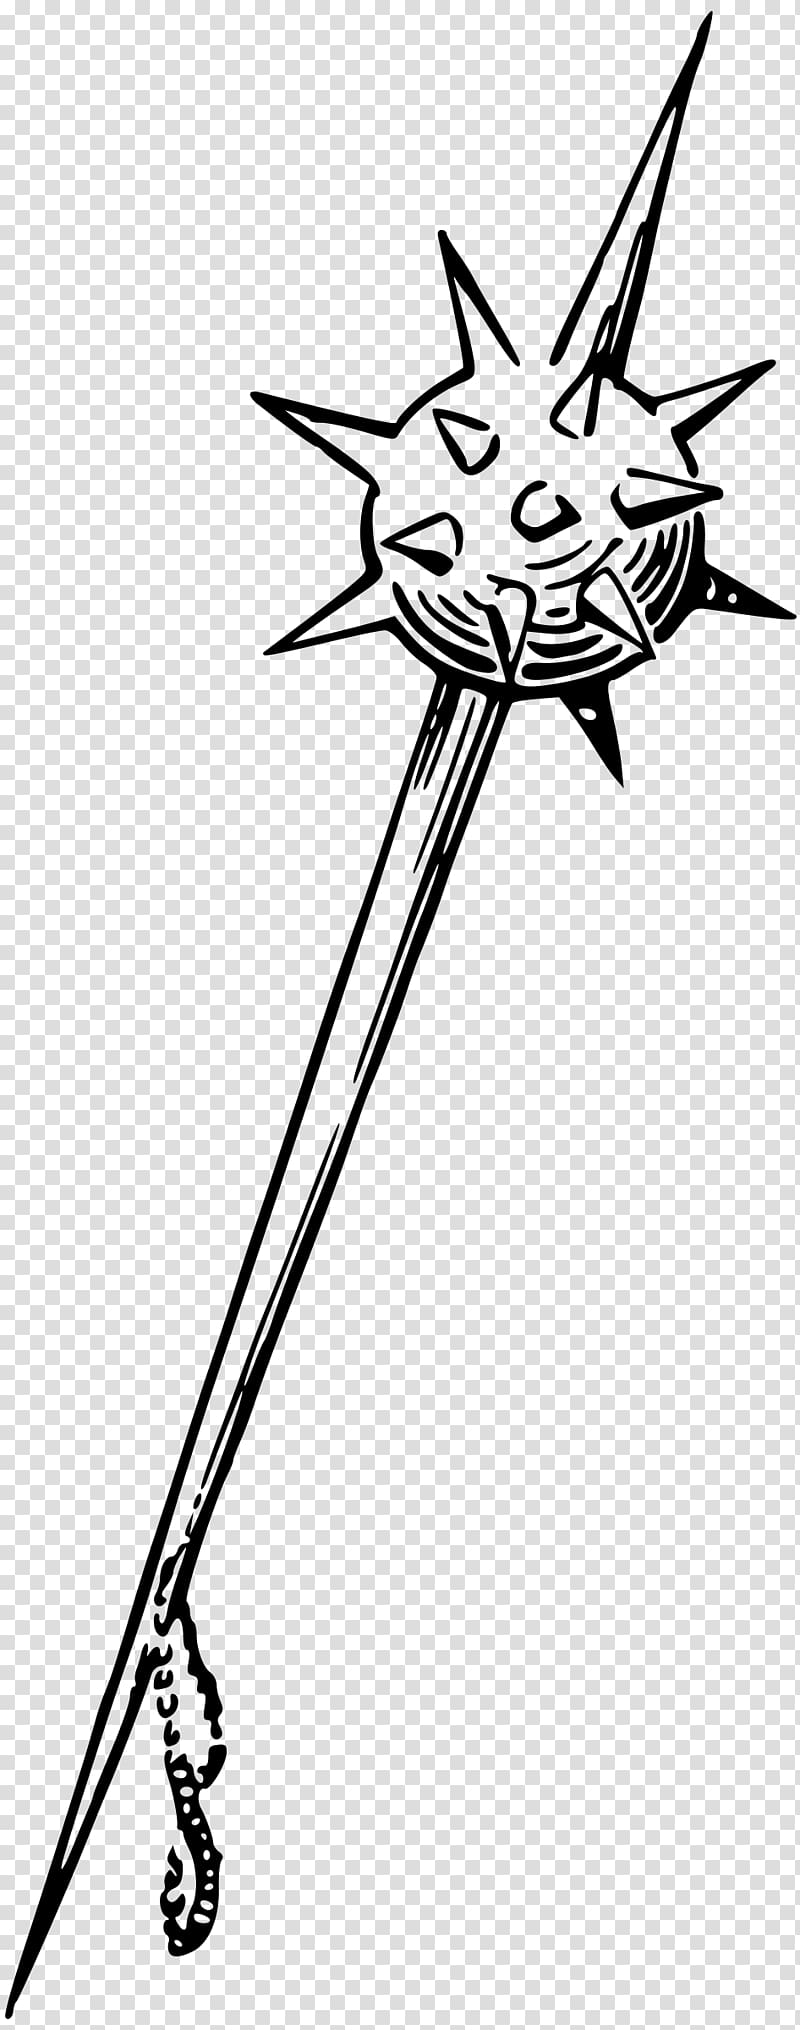 Sword Mace Club Weapon , Sword transparent background PNG clipart